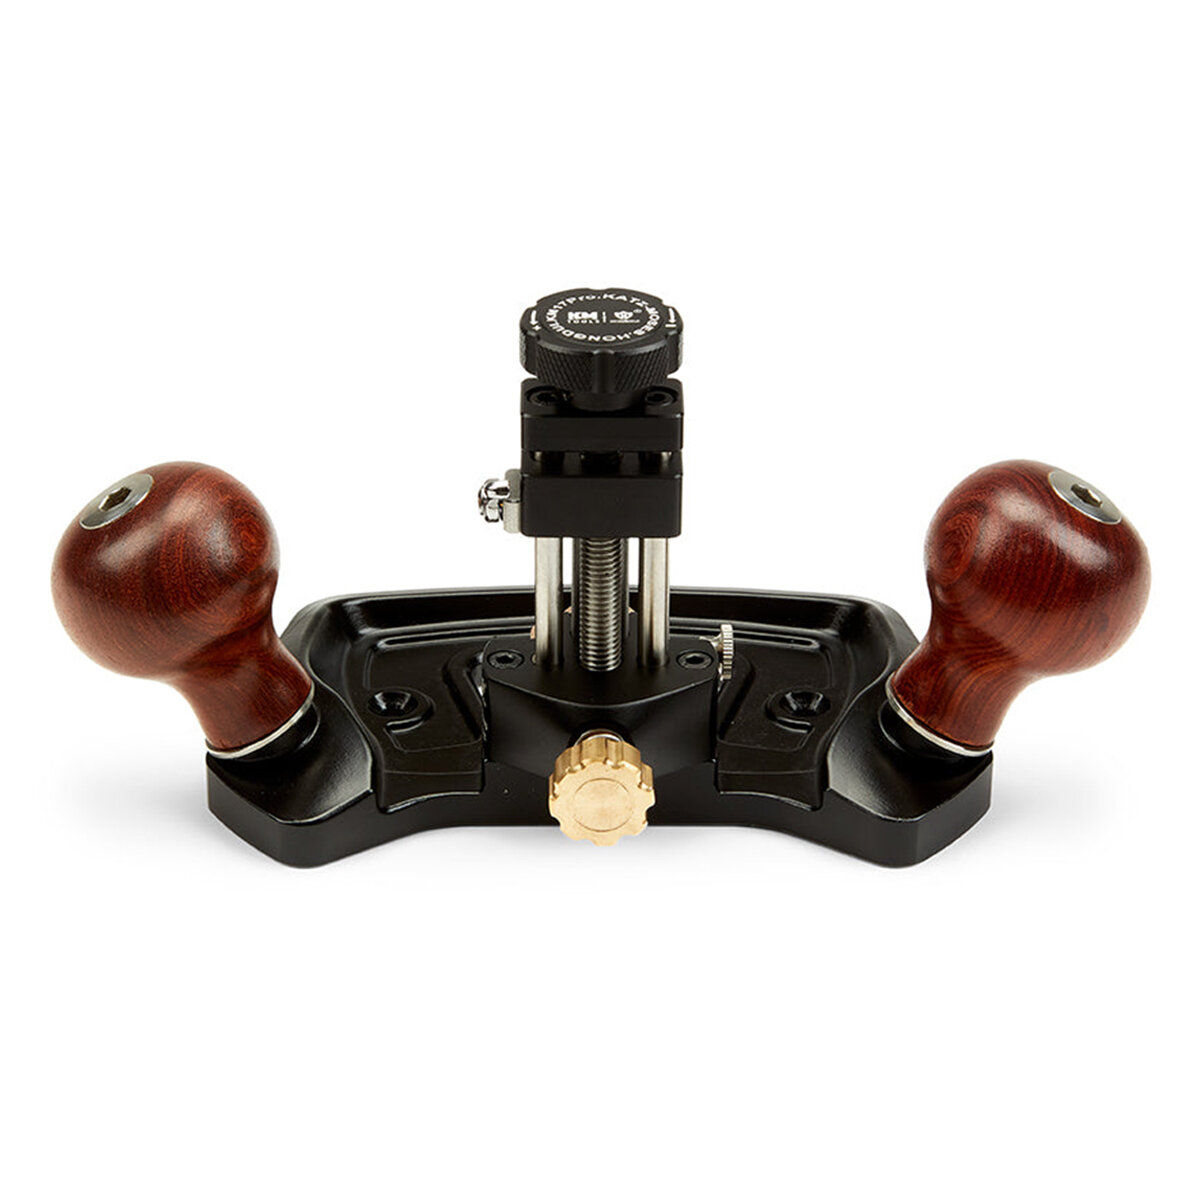 HONGDUI KM-17 Pro Router Plane Die Steel Body Adjustable Fence with CAM Lock Depth Stop Dual Blade 1/2inches width For Fine Tuning Joinery Cutting Grooves Creating Perfect Mortises